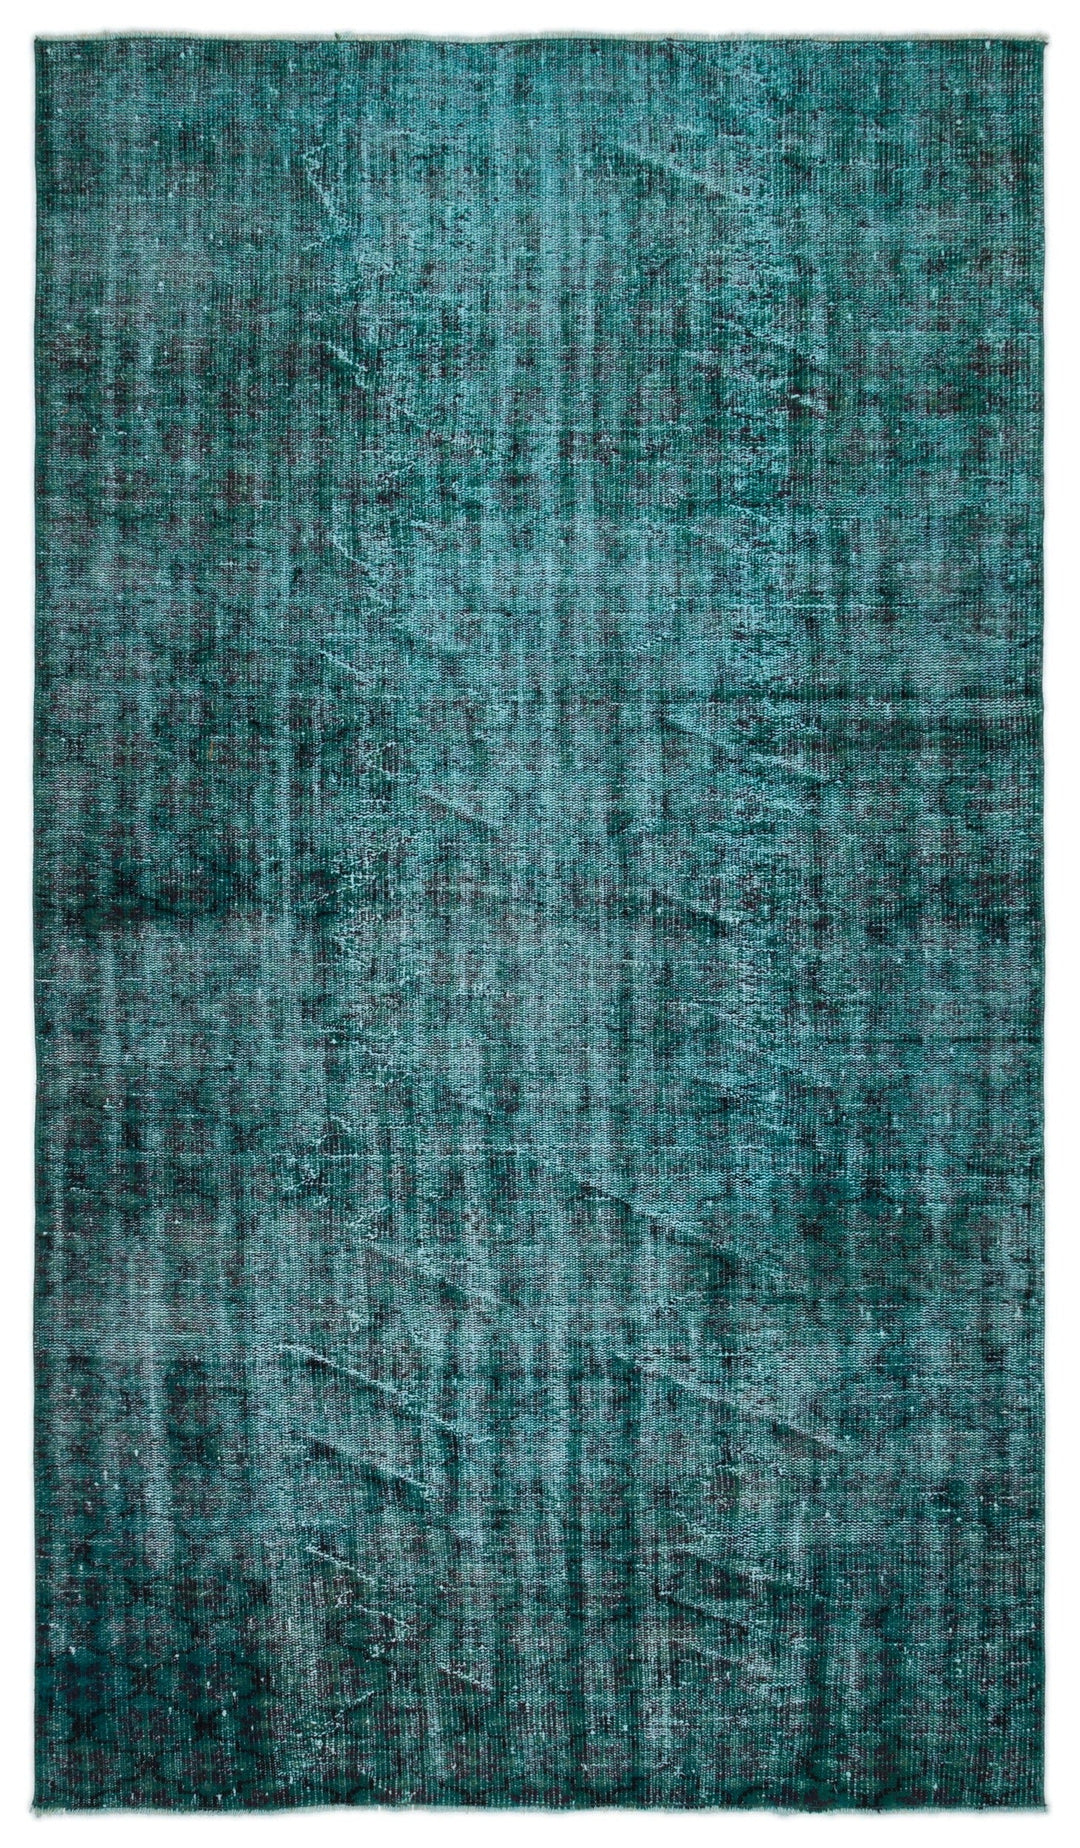 Athens Turquoise Tumbled Wool Hand Woven Carpet 161 x 278